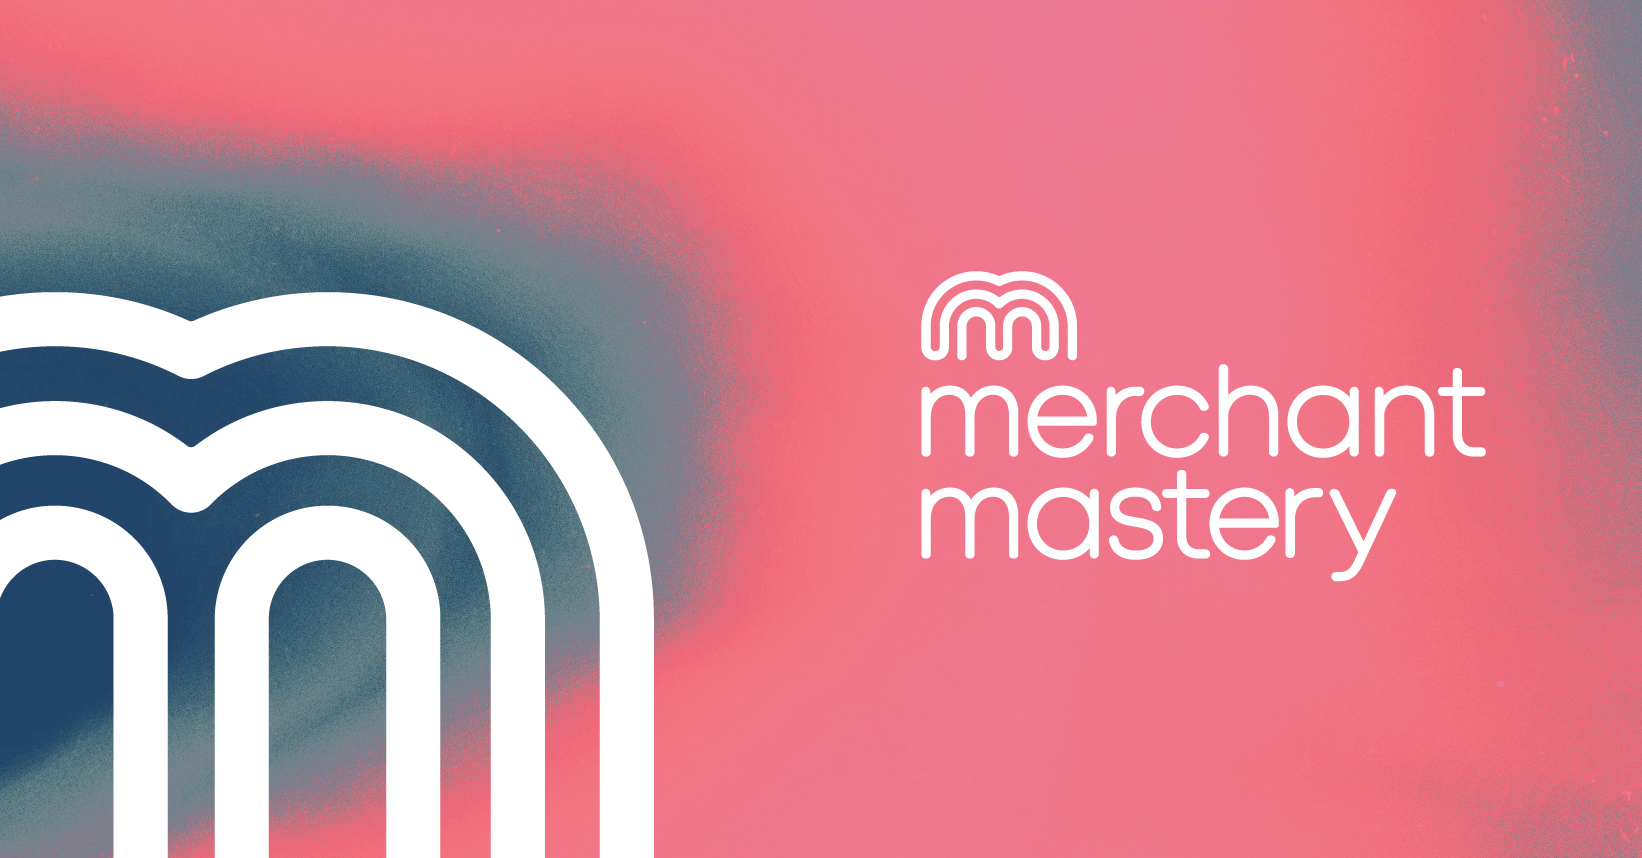 Merchant Mastery logo and pink background